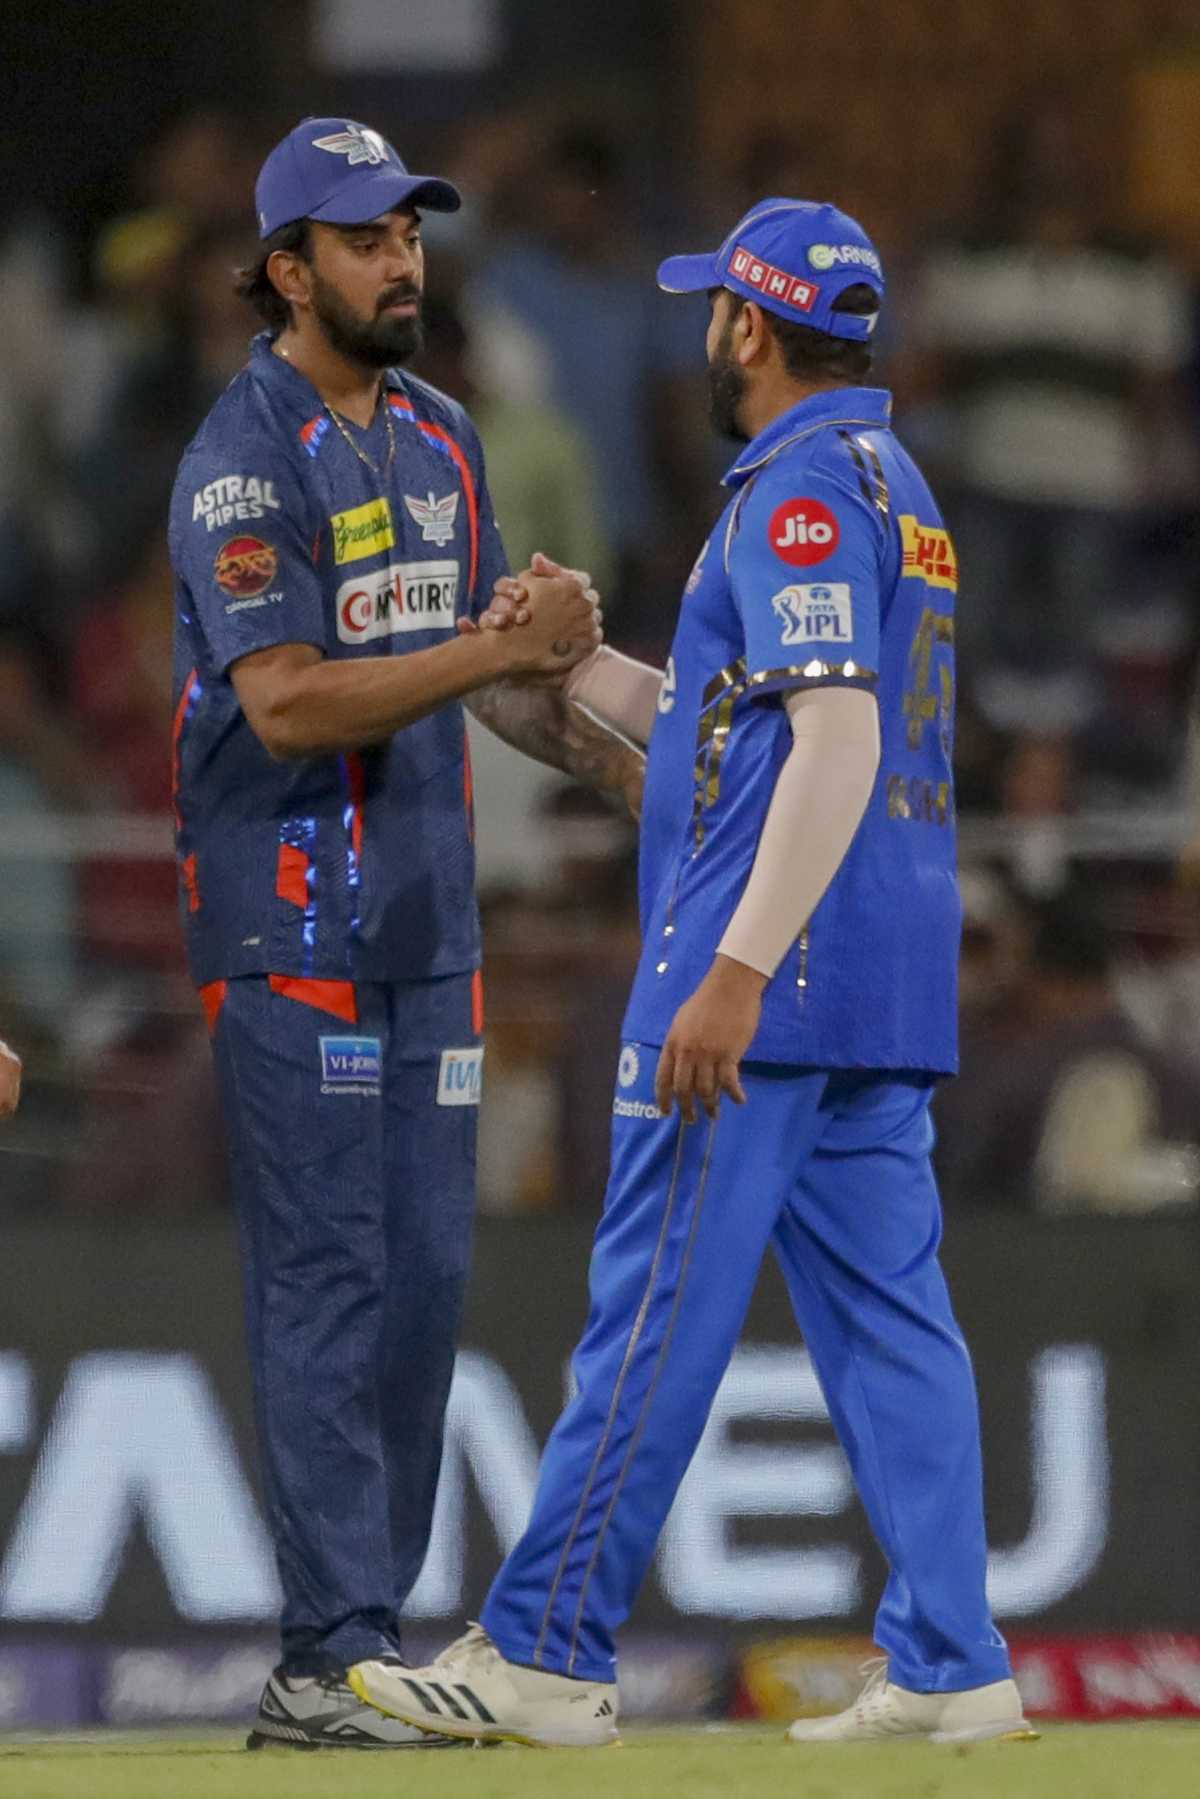 KL Rahul and Rohit Sharma greet each other at the end of the match